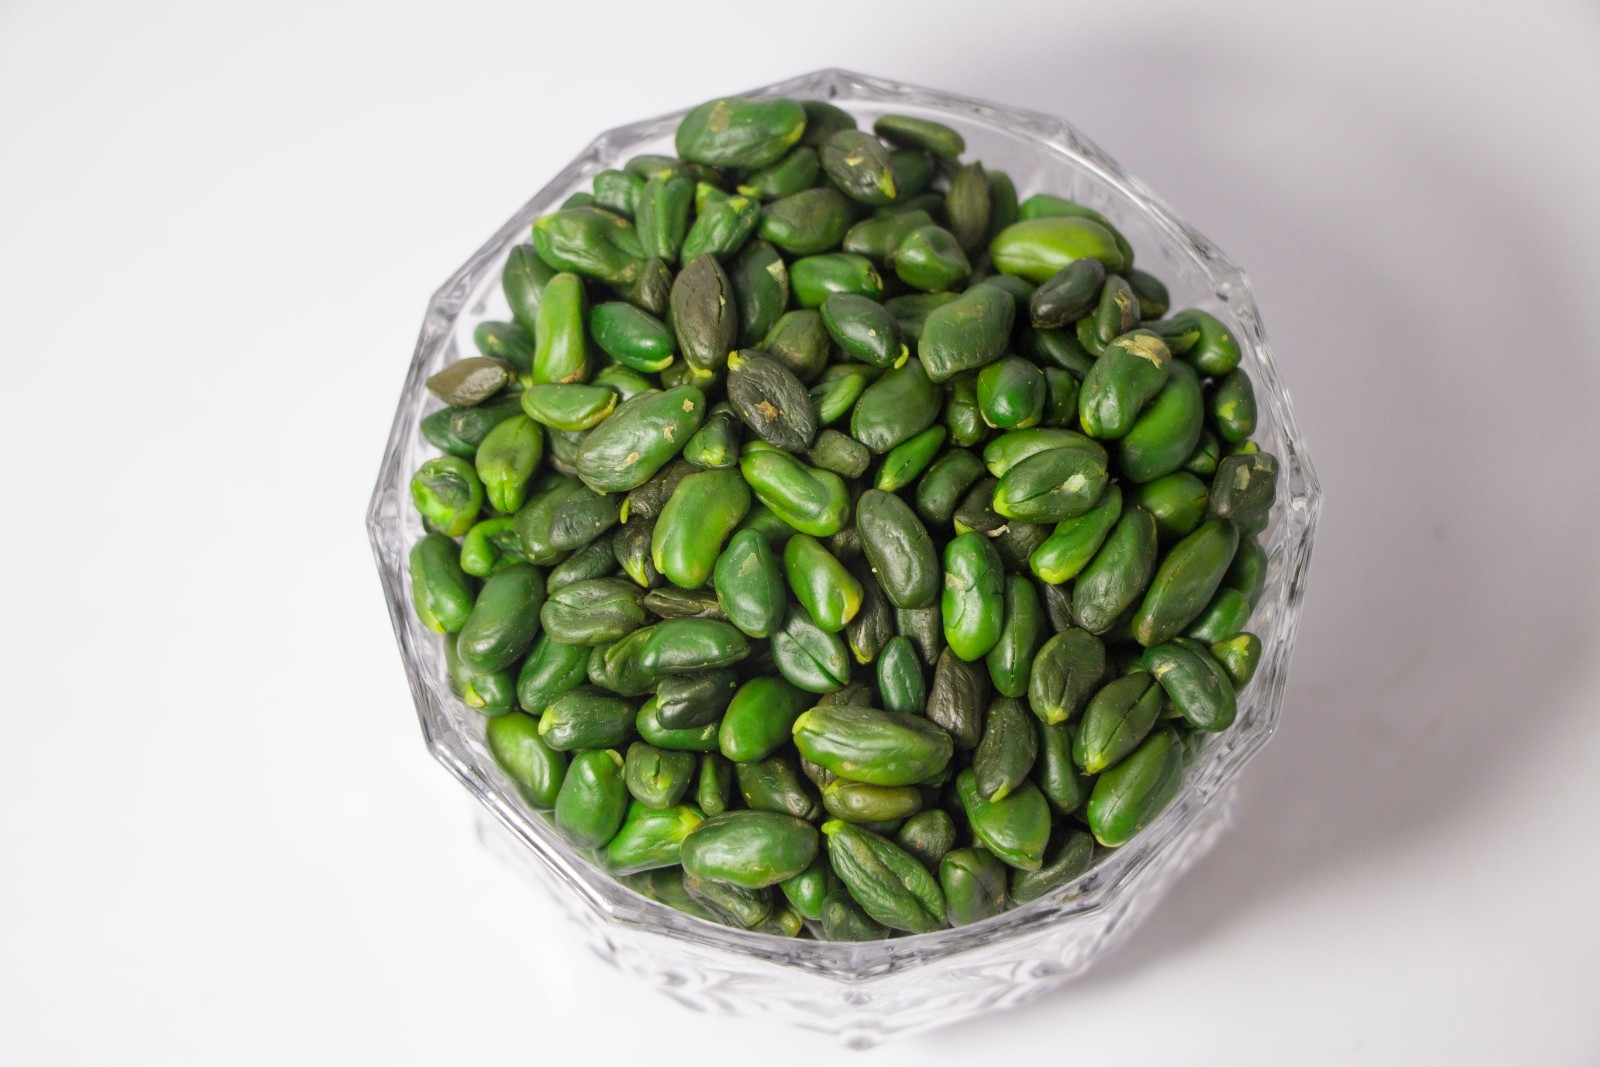 Exporter of Green Pistachio Kernels to Europe | Iranian Pistachios Producer